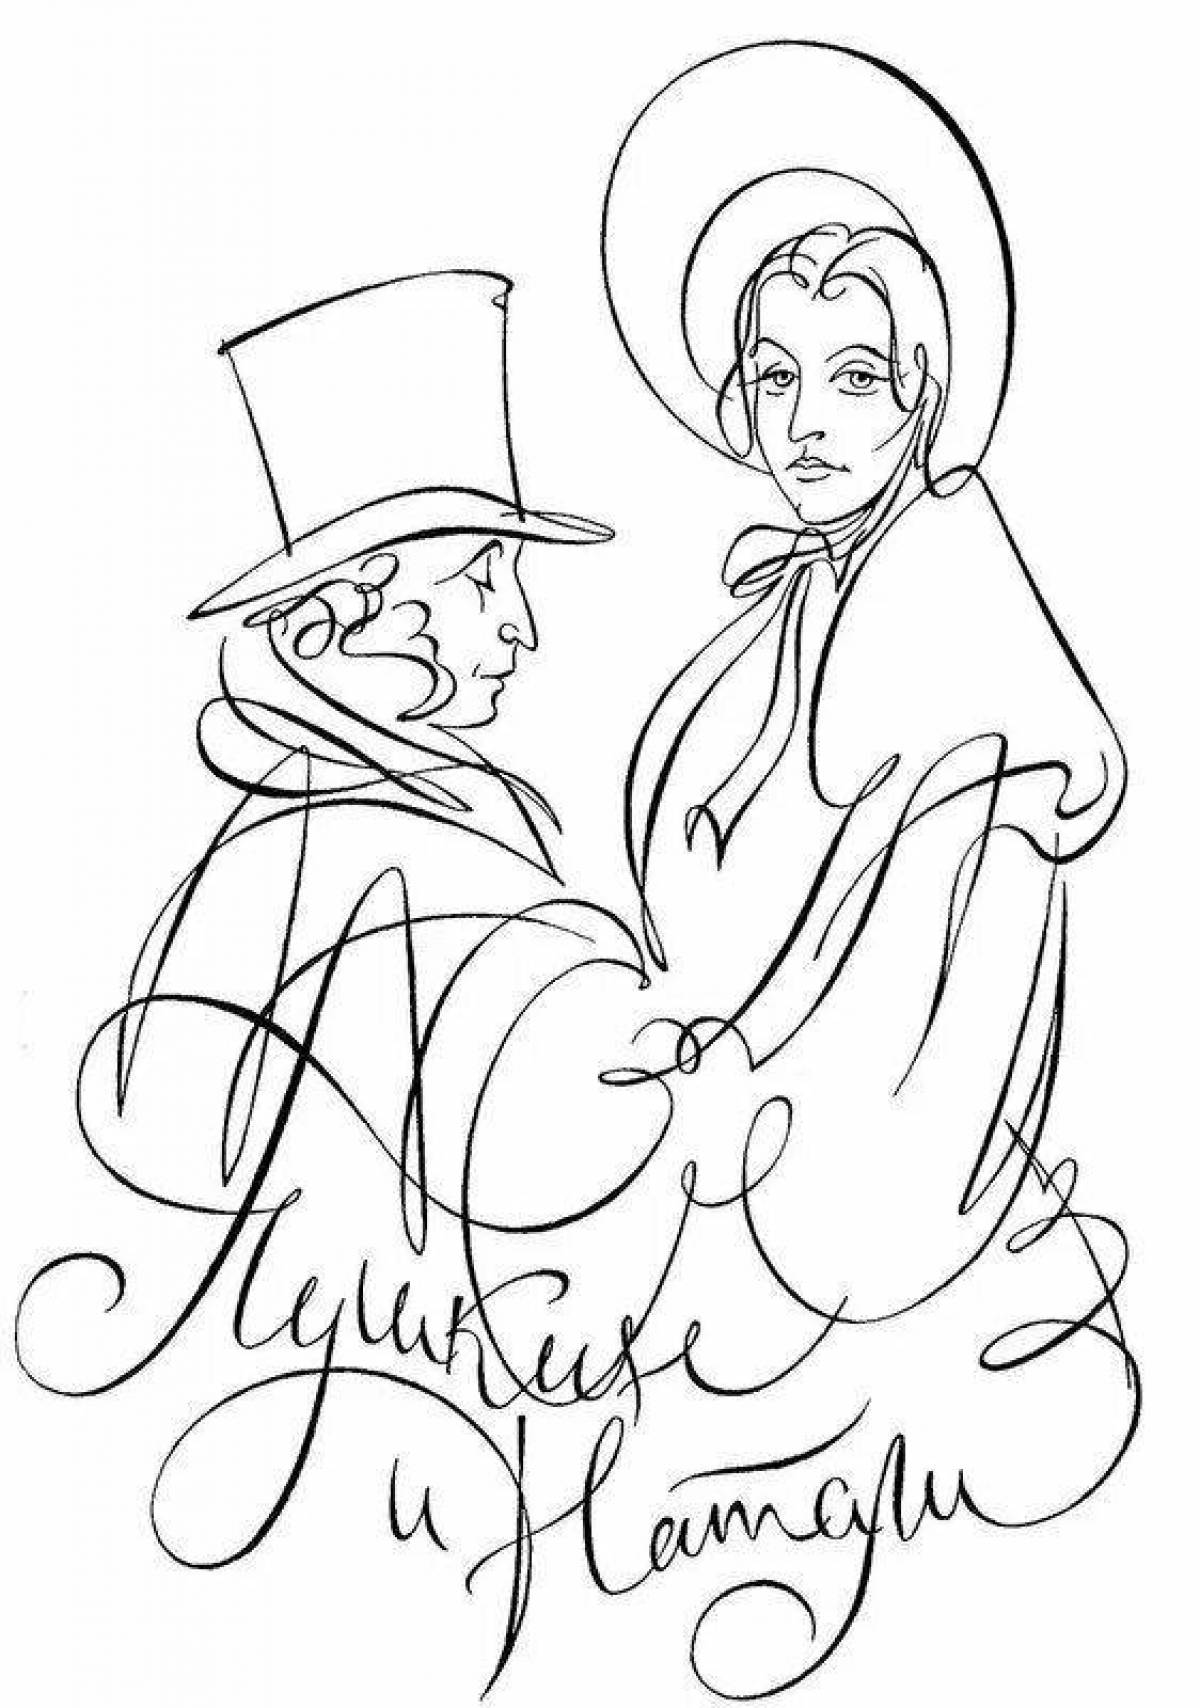 Crazy Pushkin coloring pages